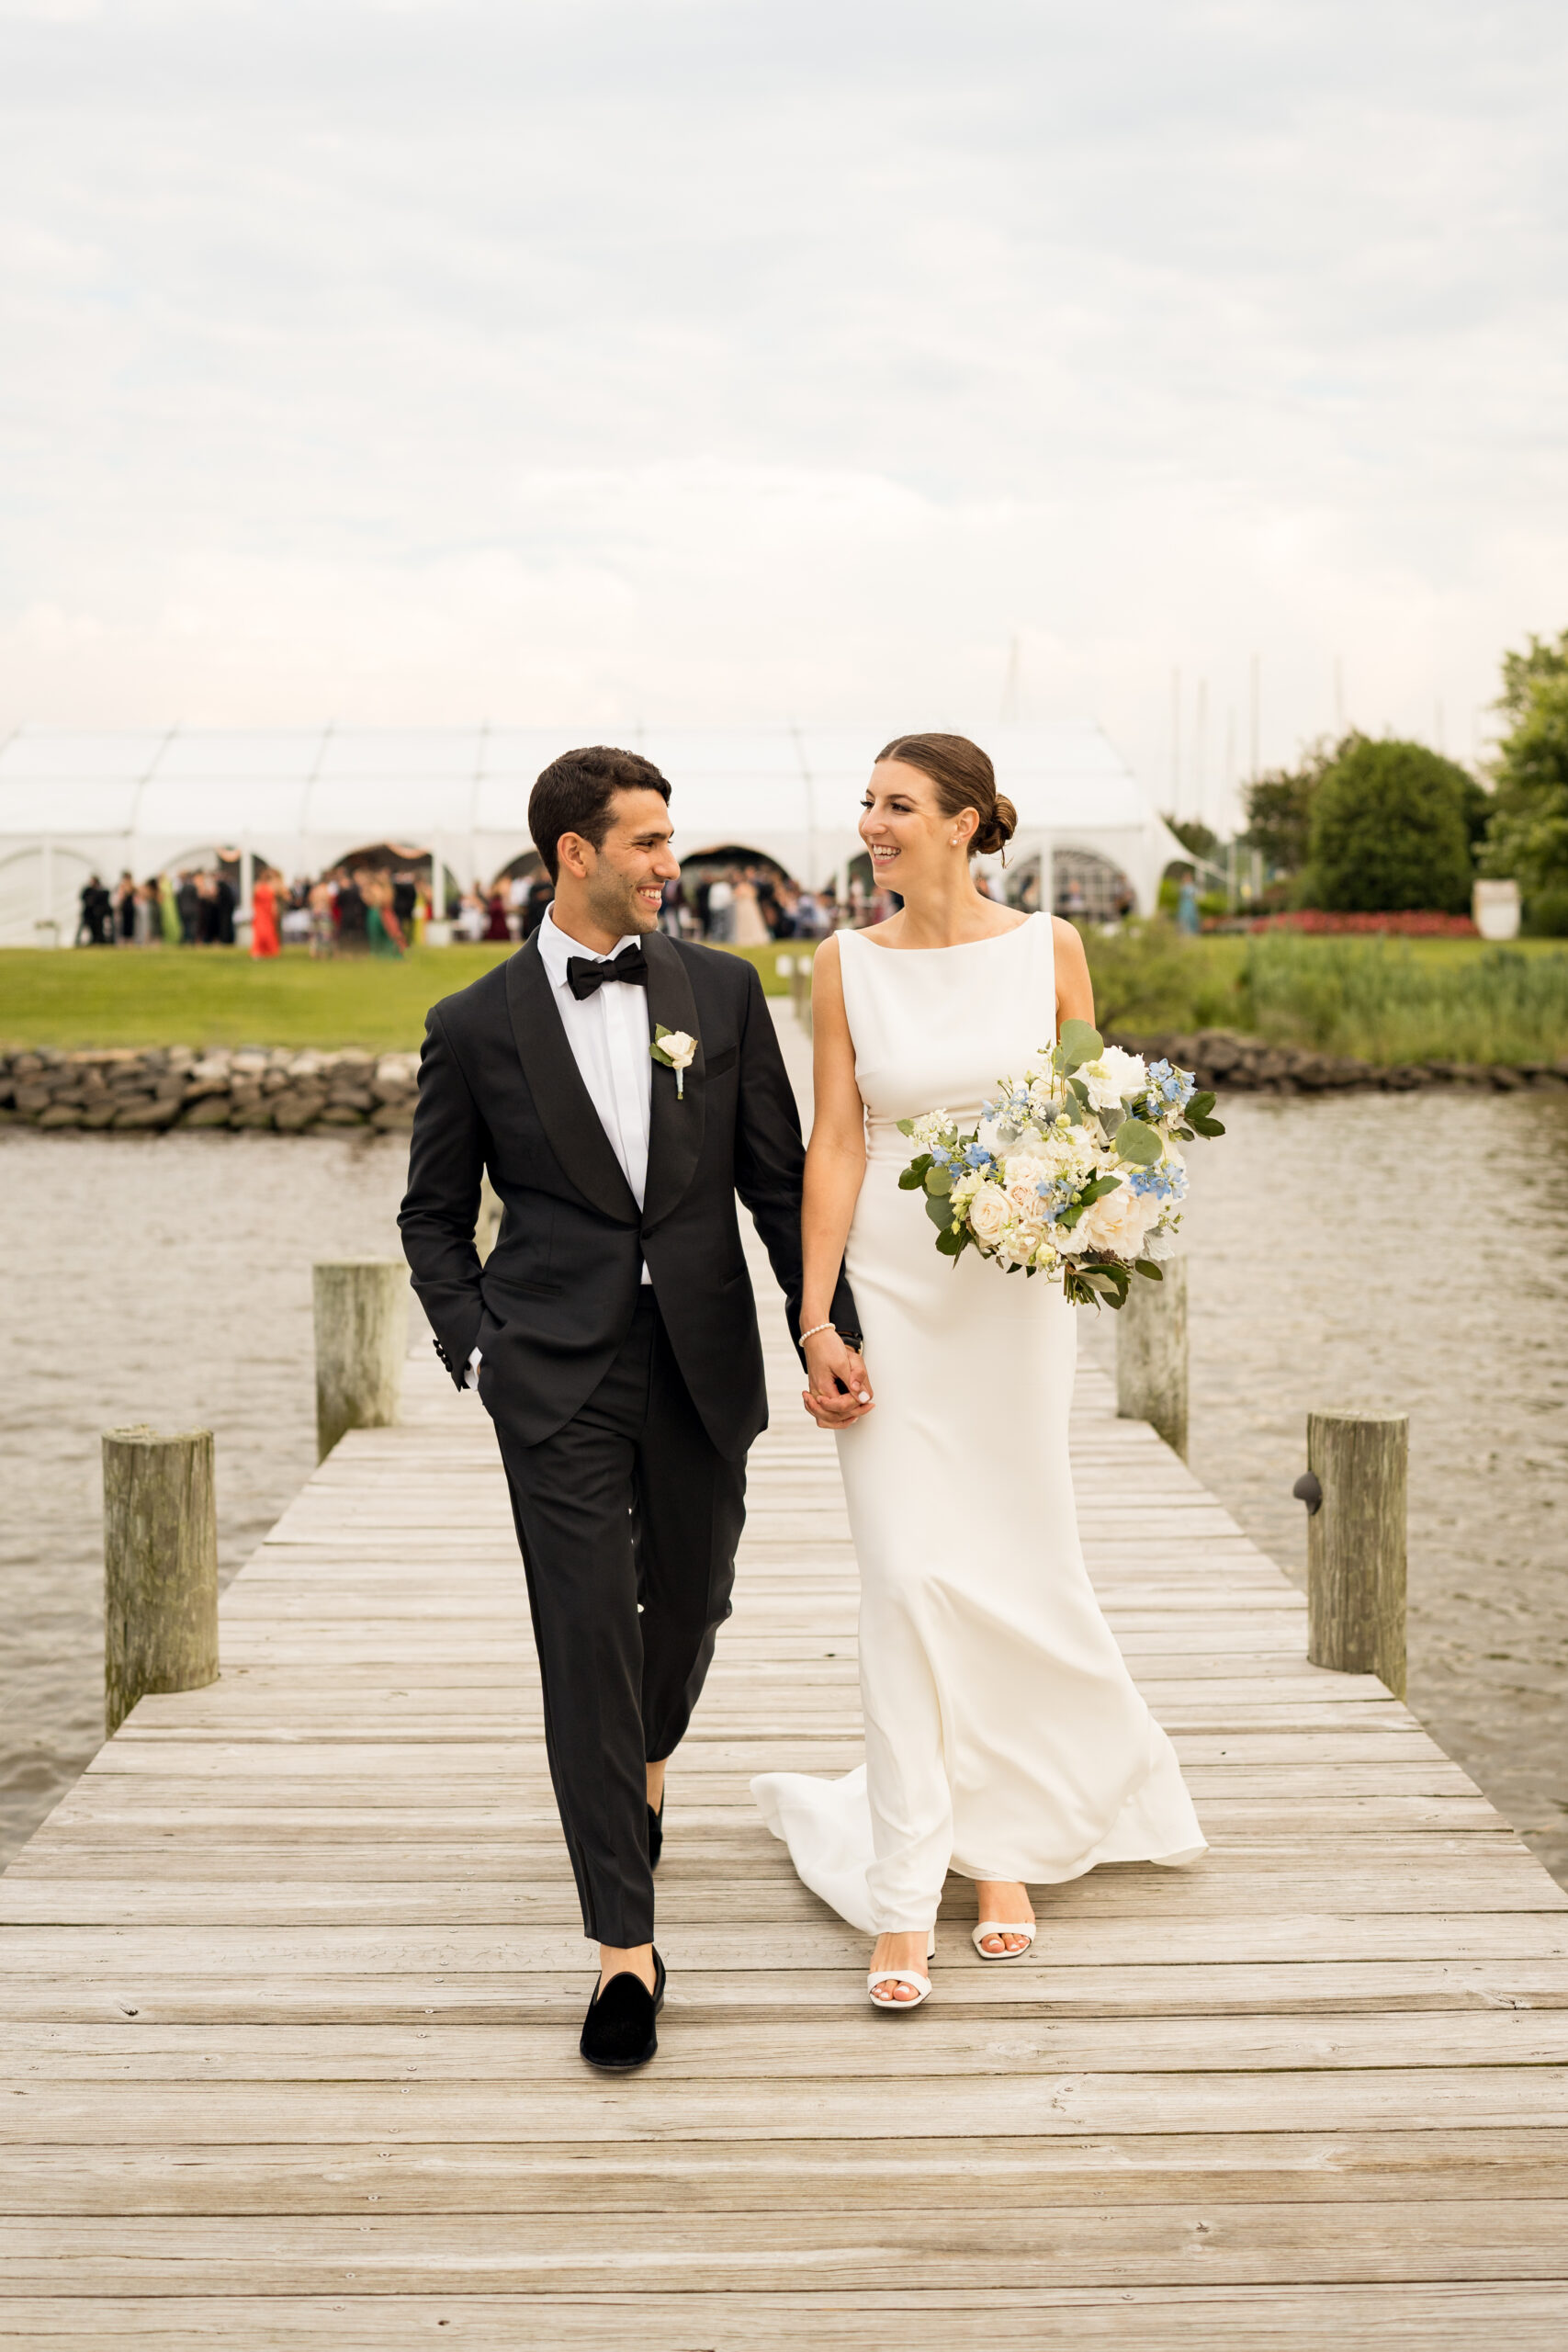 Emma and Fady had their traditional wedding ceremony and reception at the Polynesian Lawn and Paradise Ballroom at Herrington on the Bay. Herrington is a coastal wedding venue on Chesapeake Bay. These photos show the happy couple on the dock at the venue, with their reception space in the background.